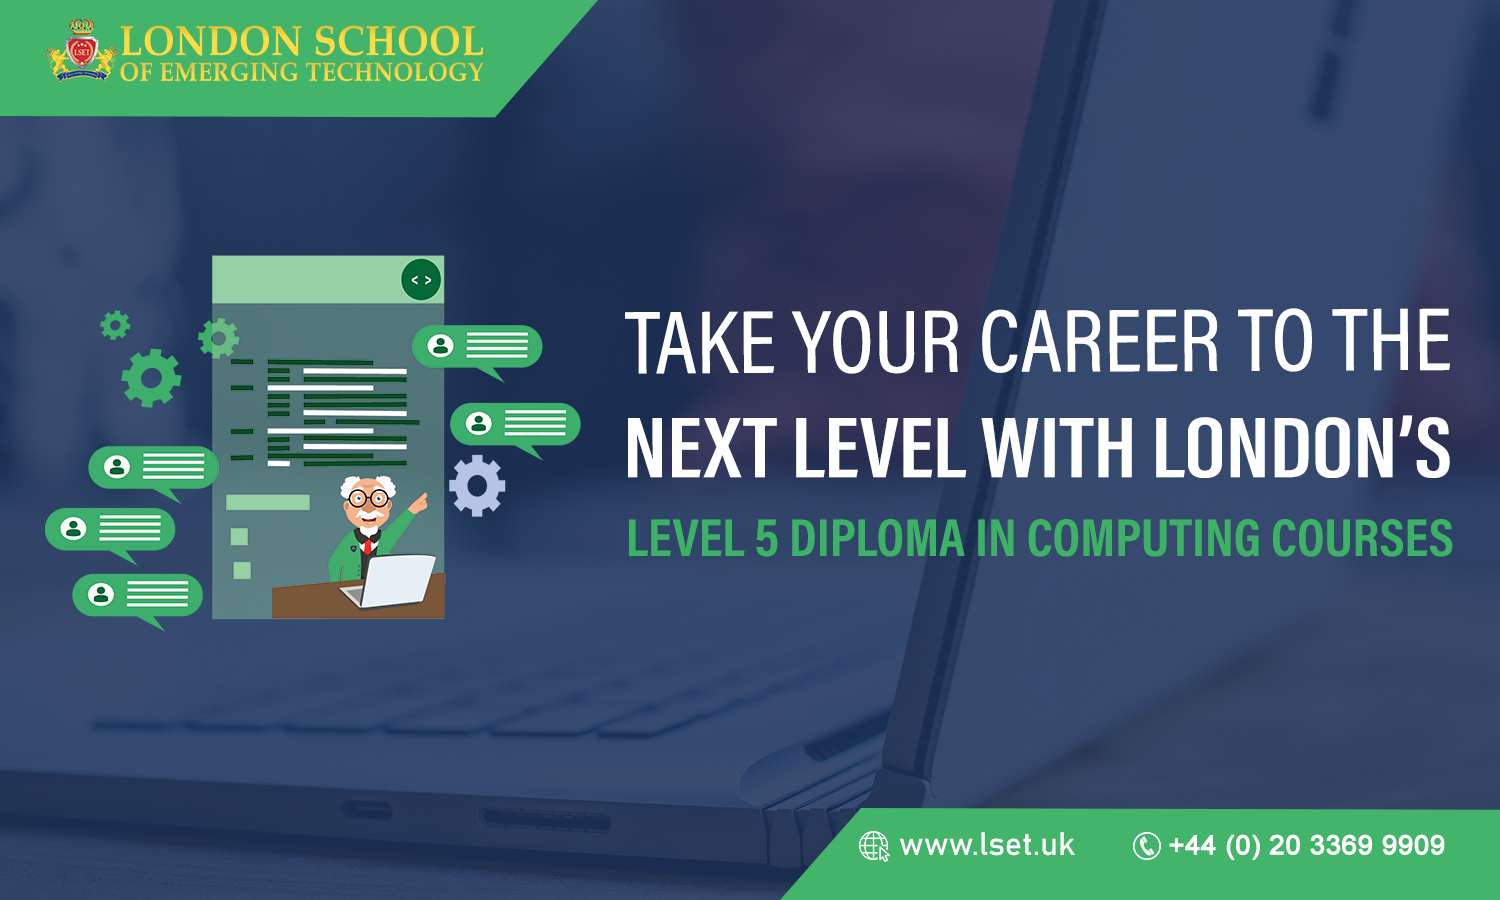 Take Your Career to the Next Level with London’s Level 5 Diploma in Computing Courses